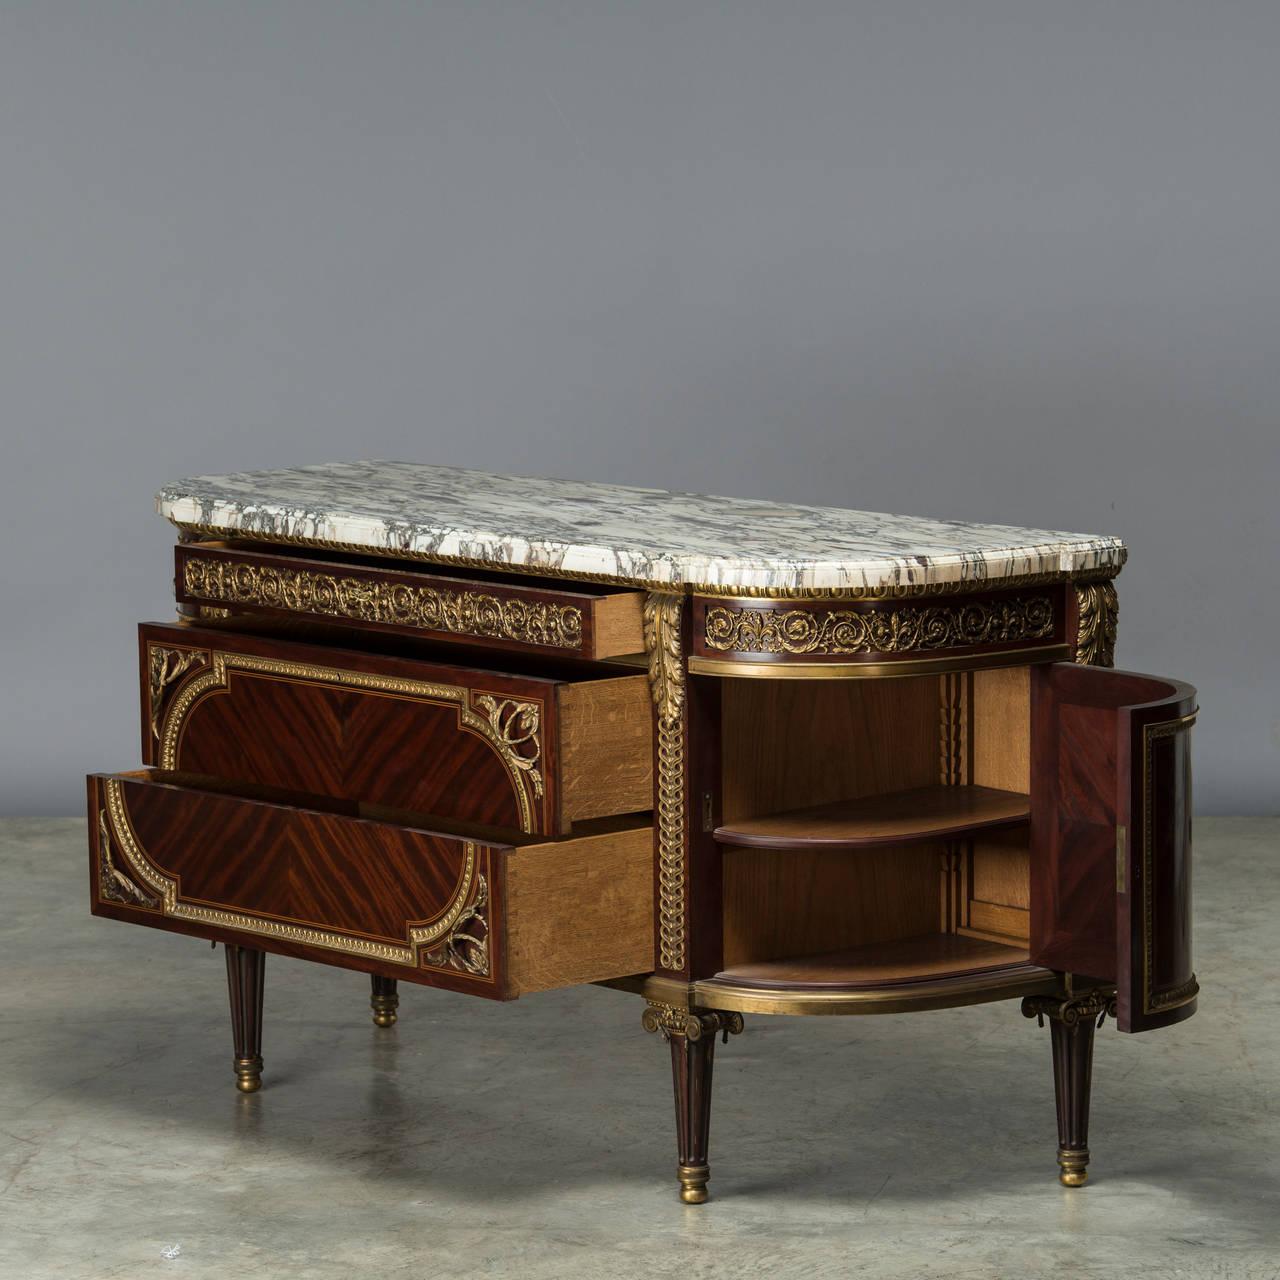 Louis XVI French Ormolu-Mounted Mahogany Commode after the Model by Jean-Francois Leleu